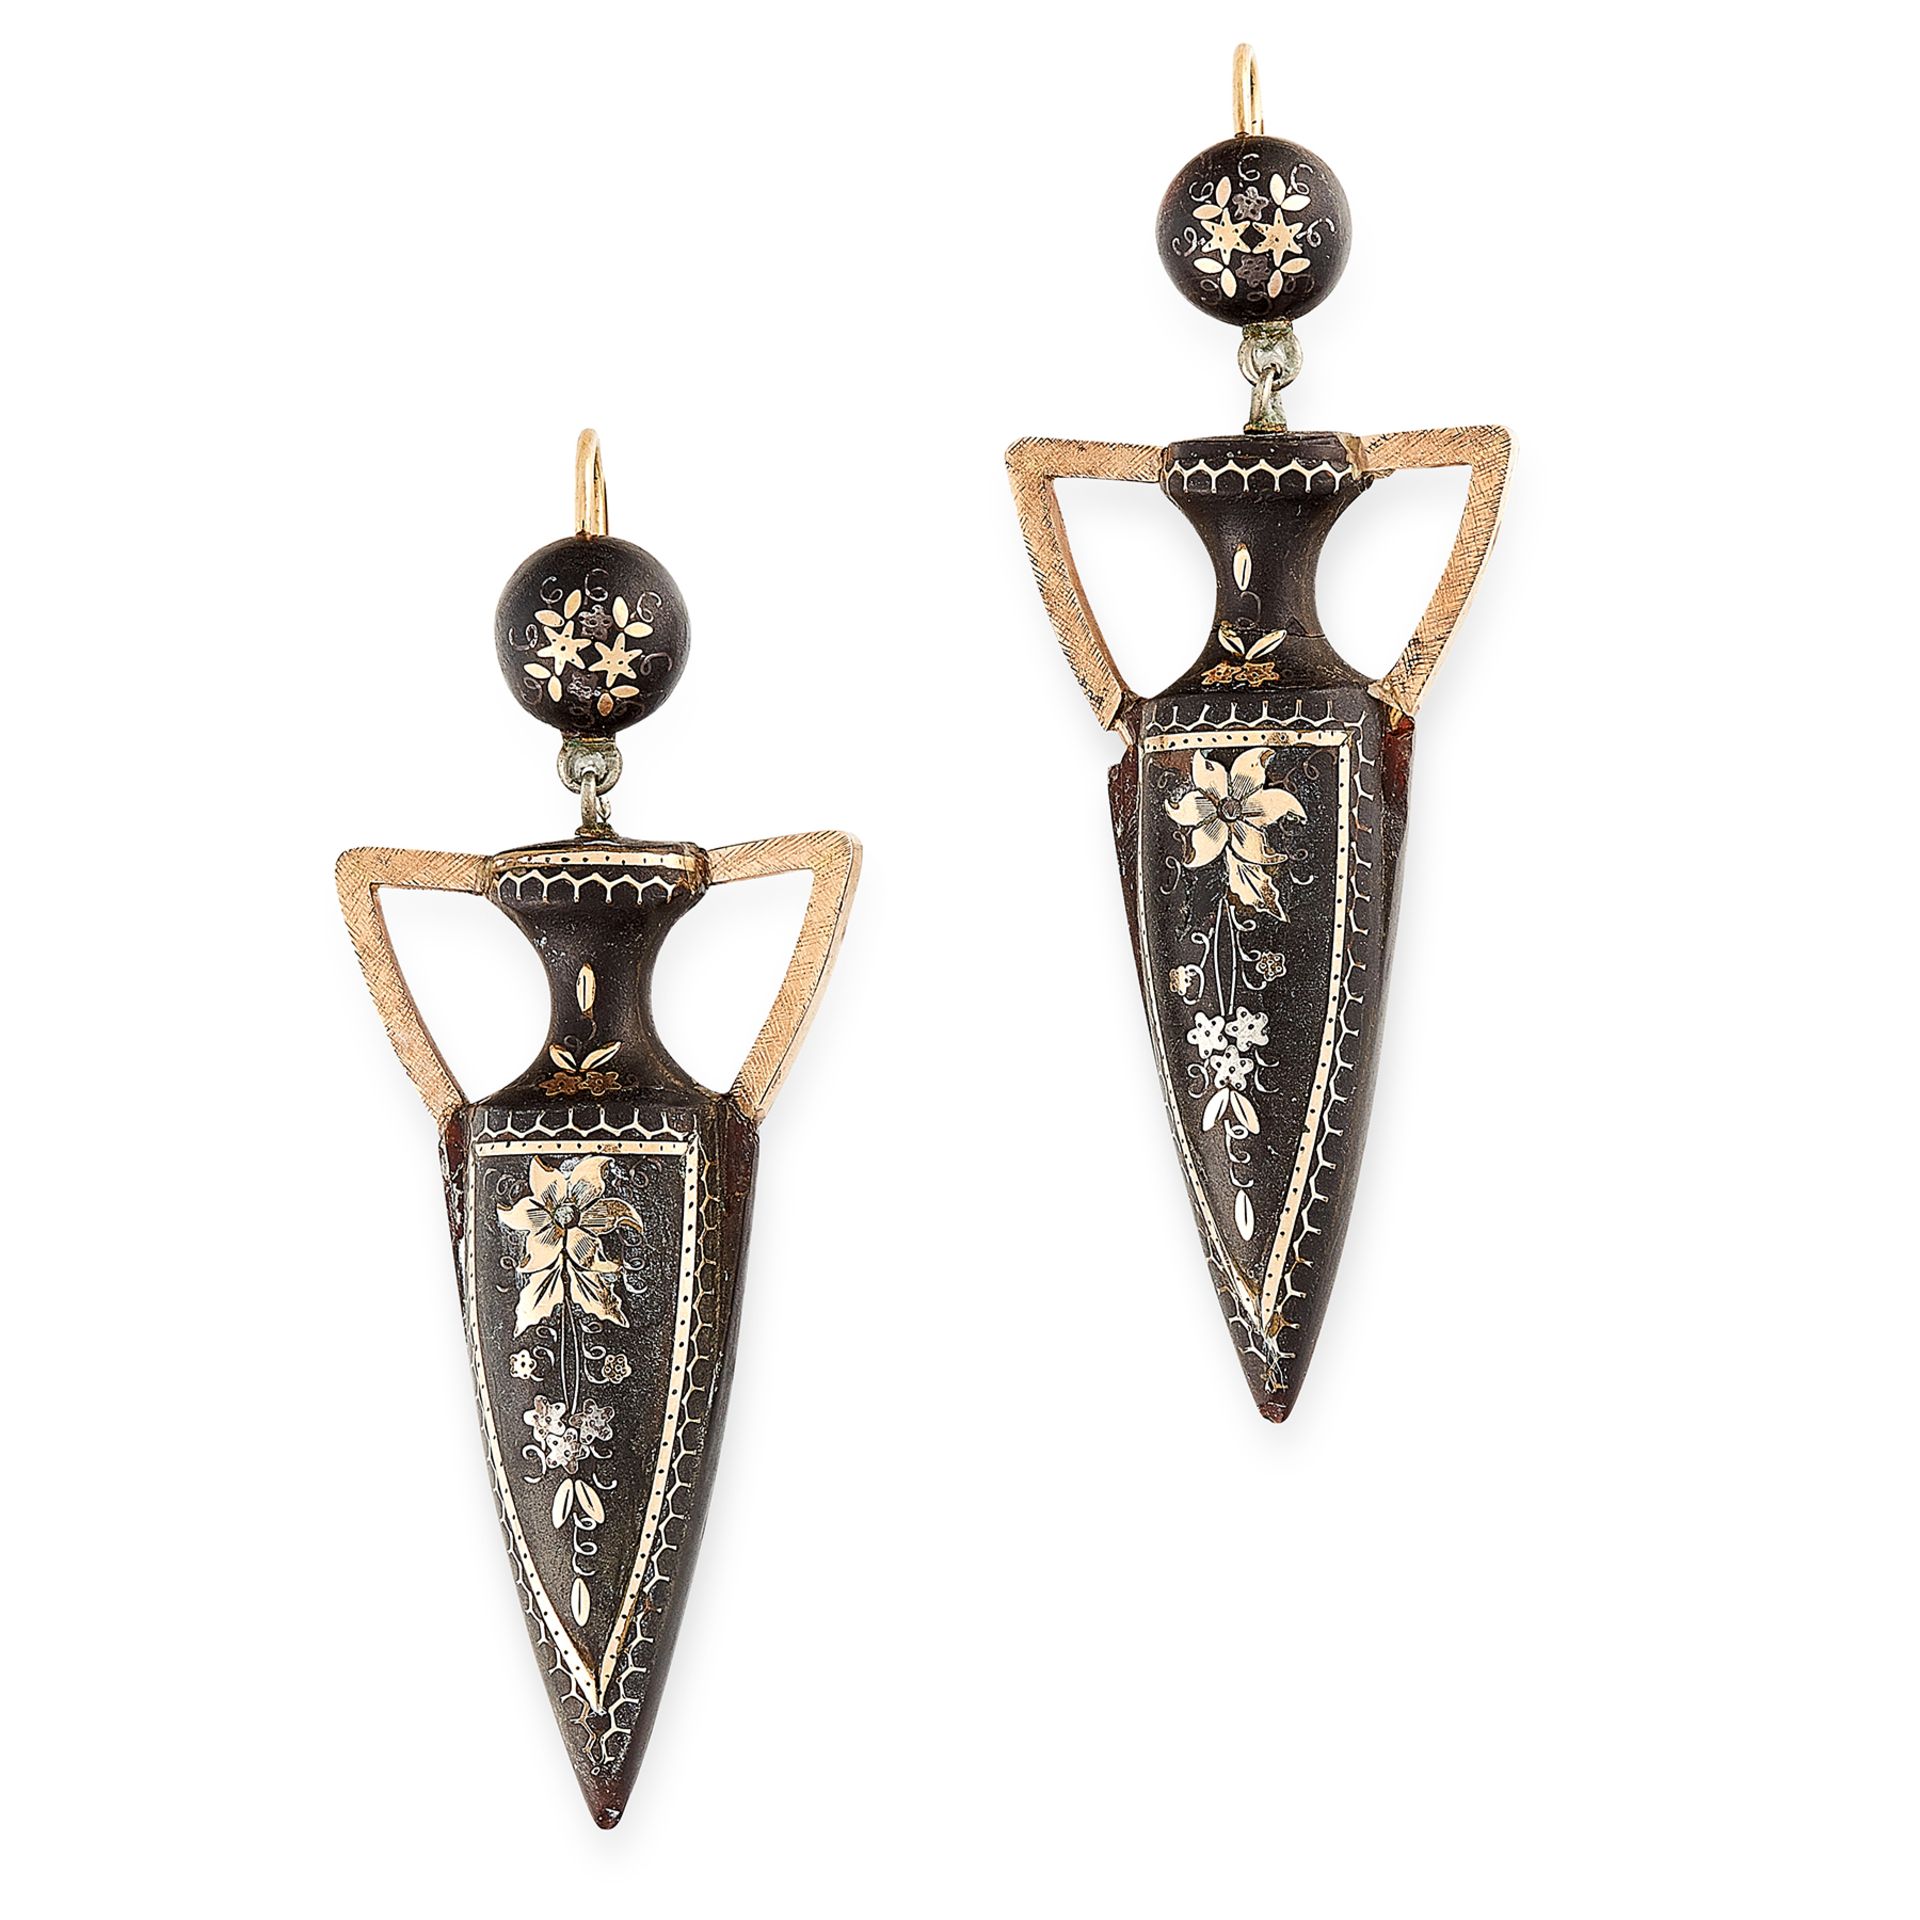 A PAIR OF ANTIQUE PIQUE TORTOISESHELL EARRINGS in yellow gold, designed at urns decorated with